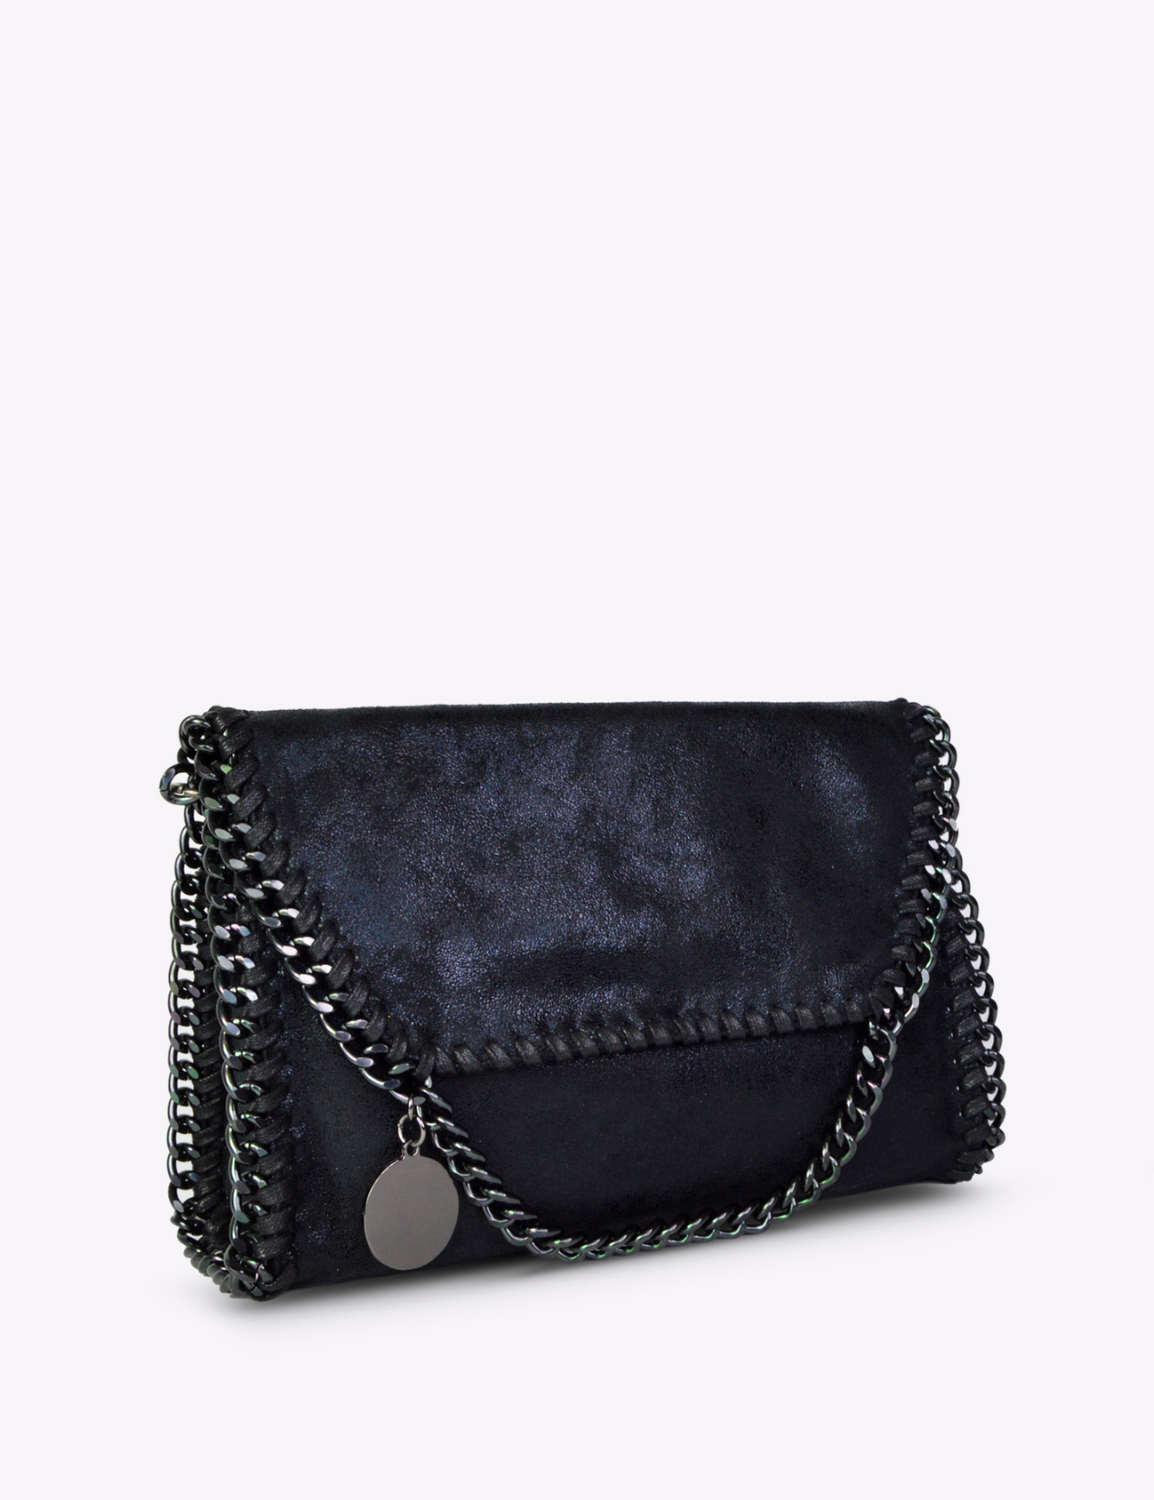 The Alesia Handmade Leather Crossbody Bag Magnetic Snap / Black